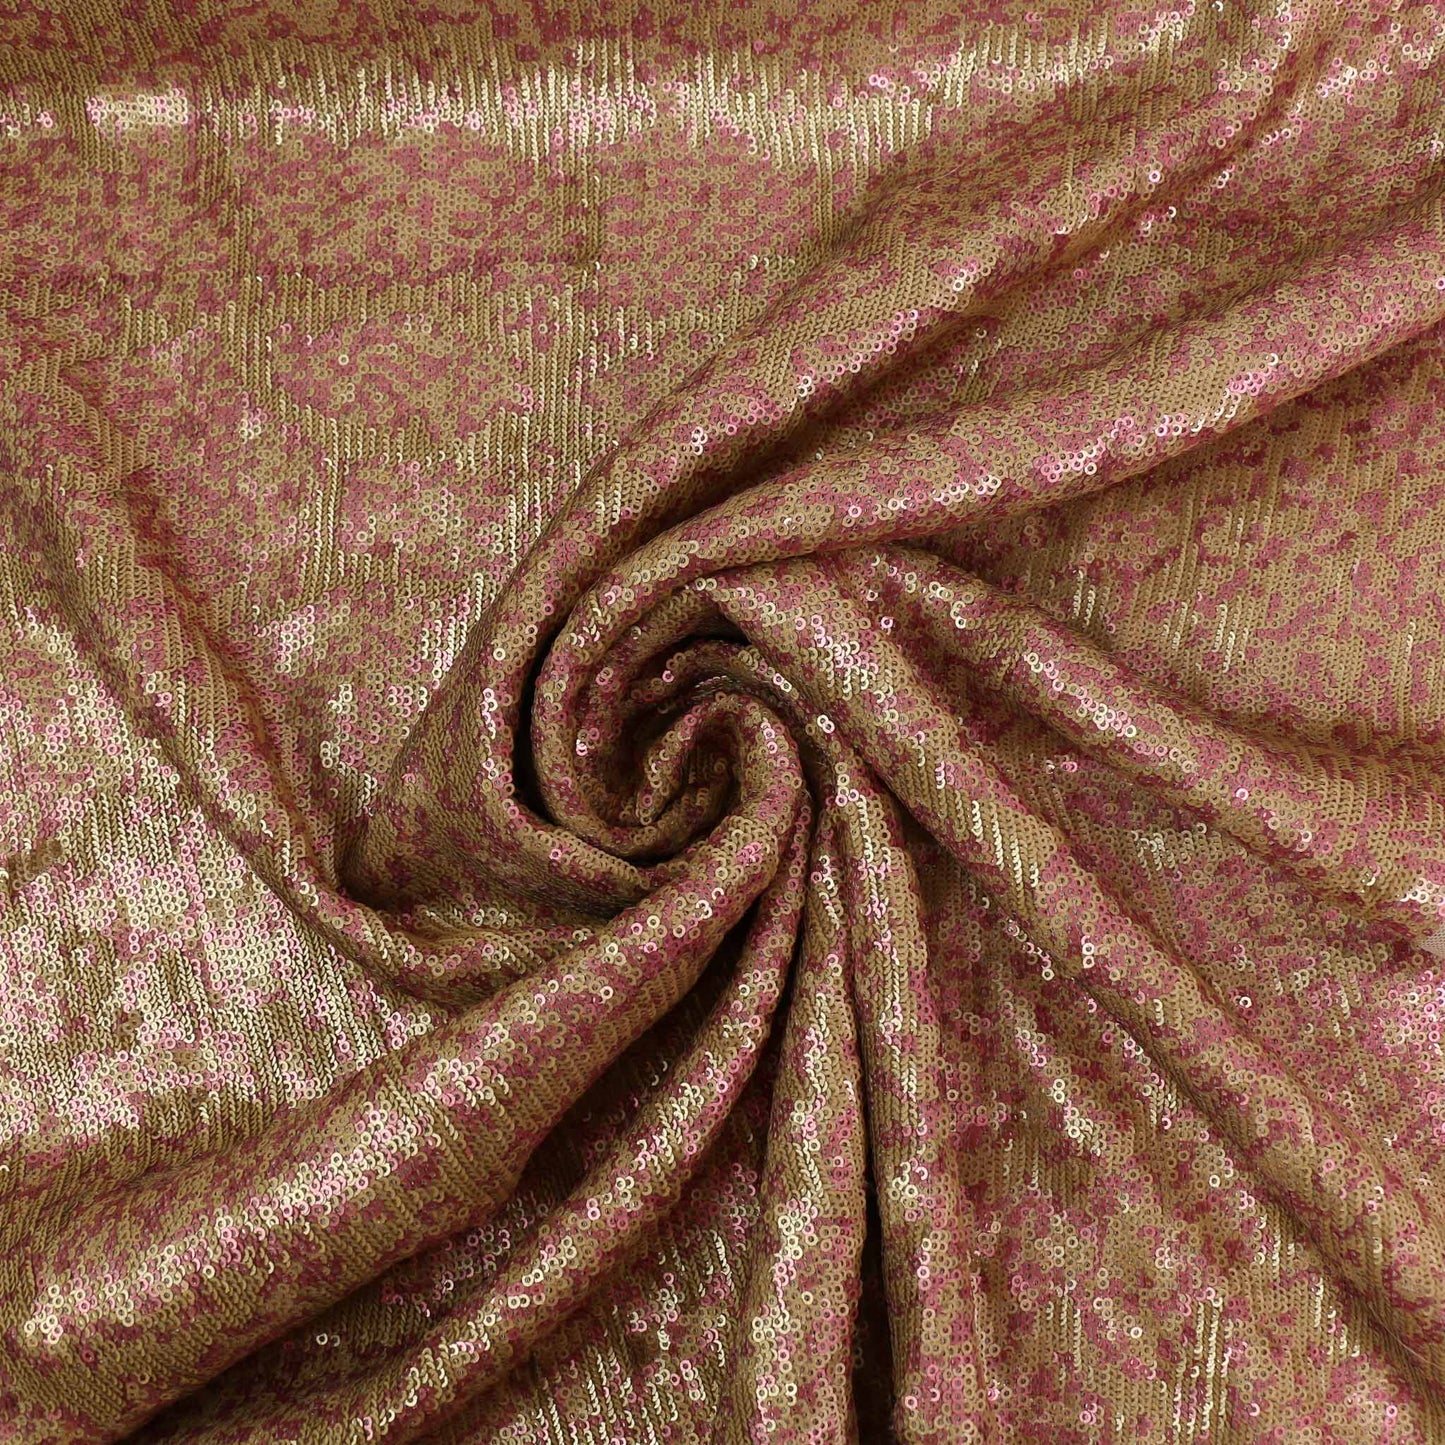 Sequin Fabric - Gold, Dusty Pink